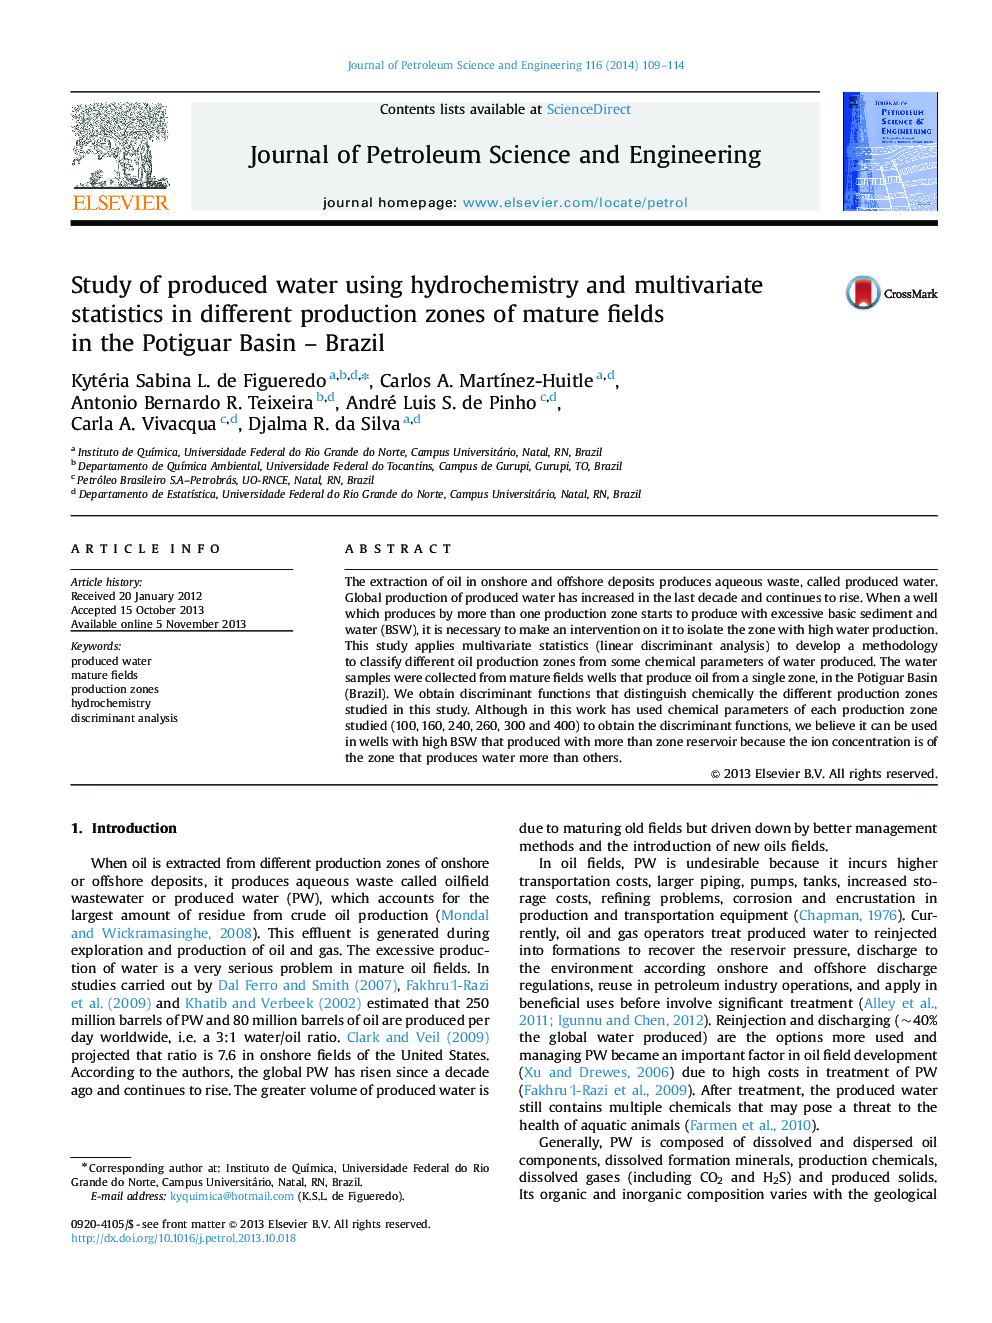 Study of produced water using hydrochemistry and multivariate statistics in different production zones of mature fields in the Potiguar Basin – Brazil